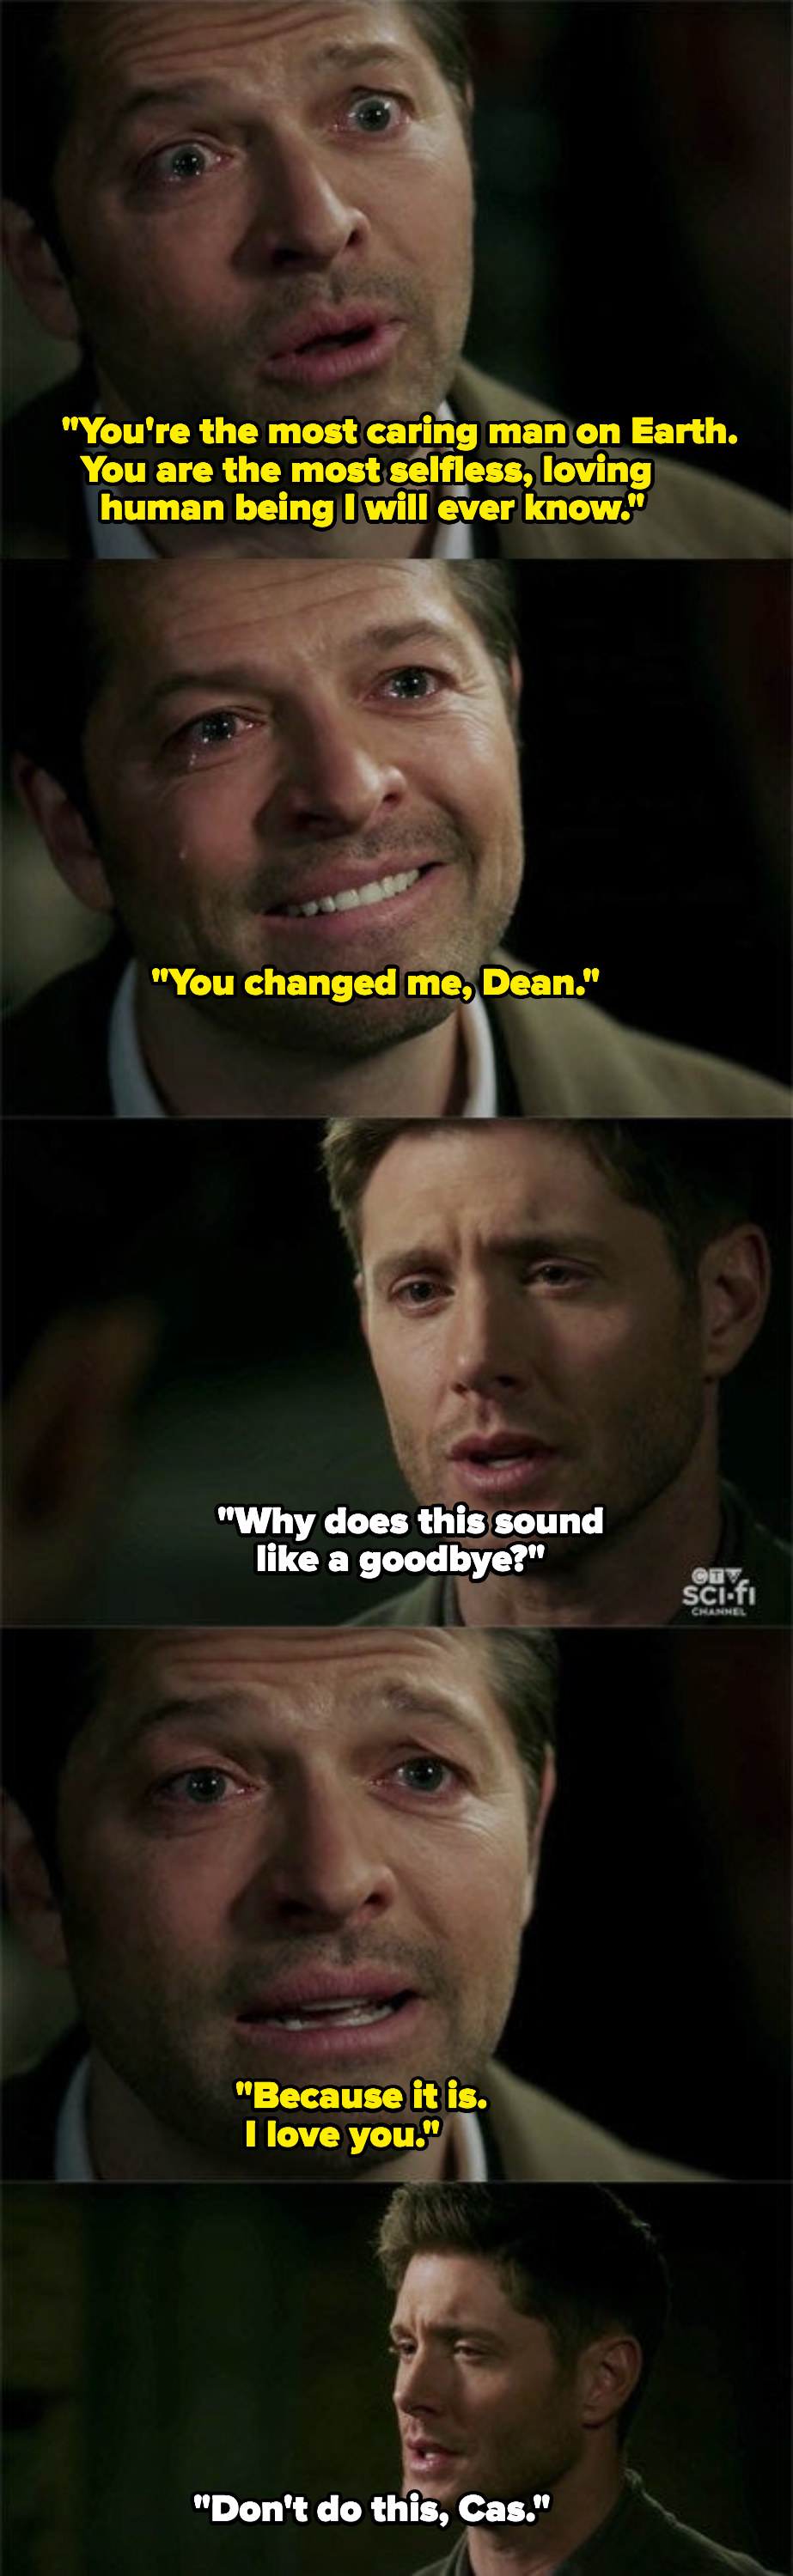 Castiel telling Dean he loves him and that Dean changed him